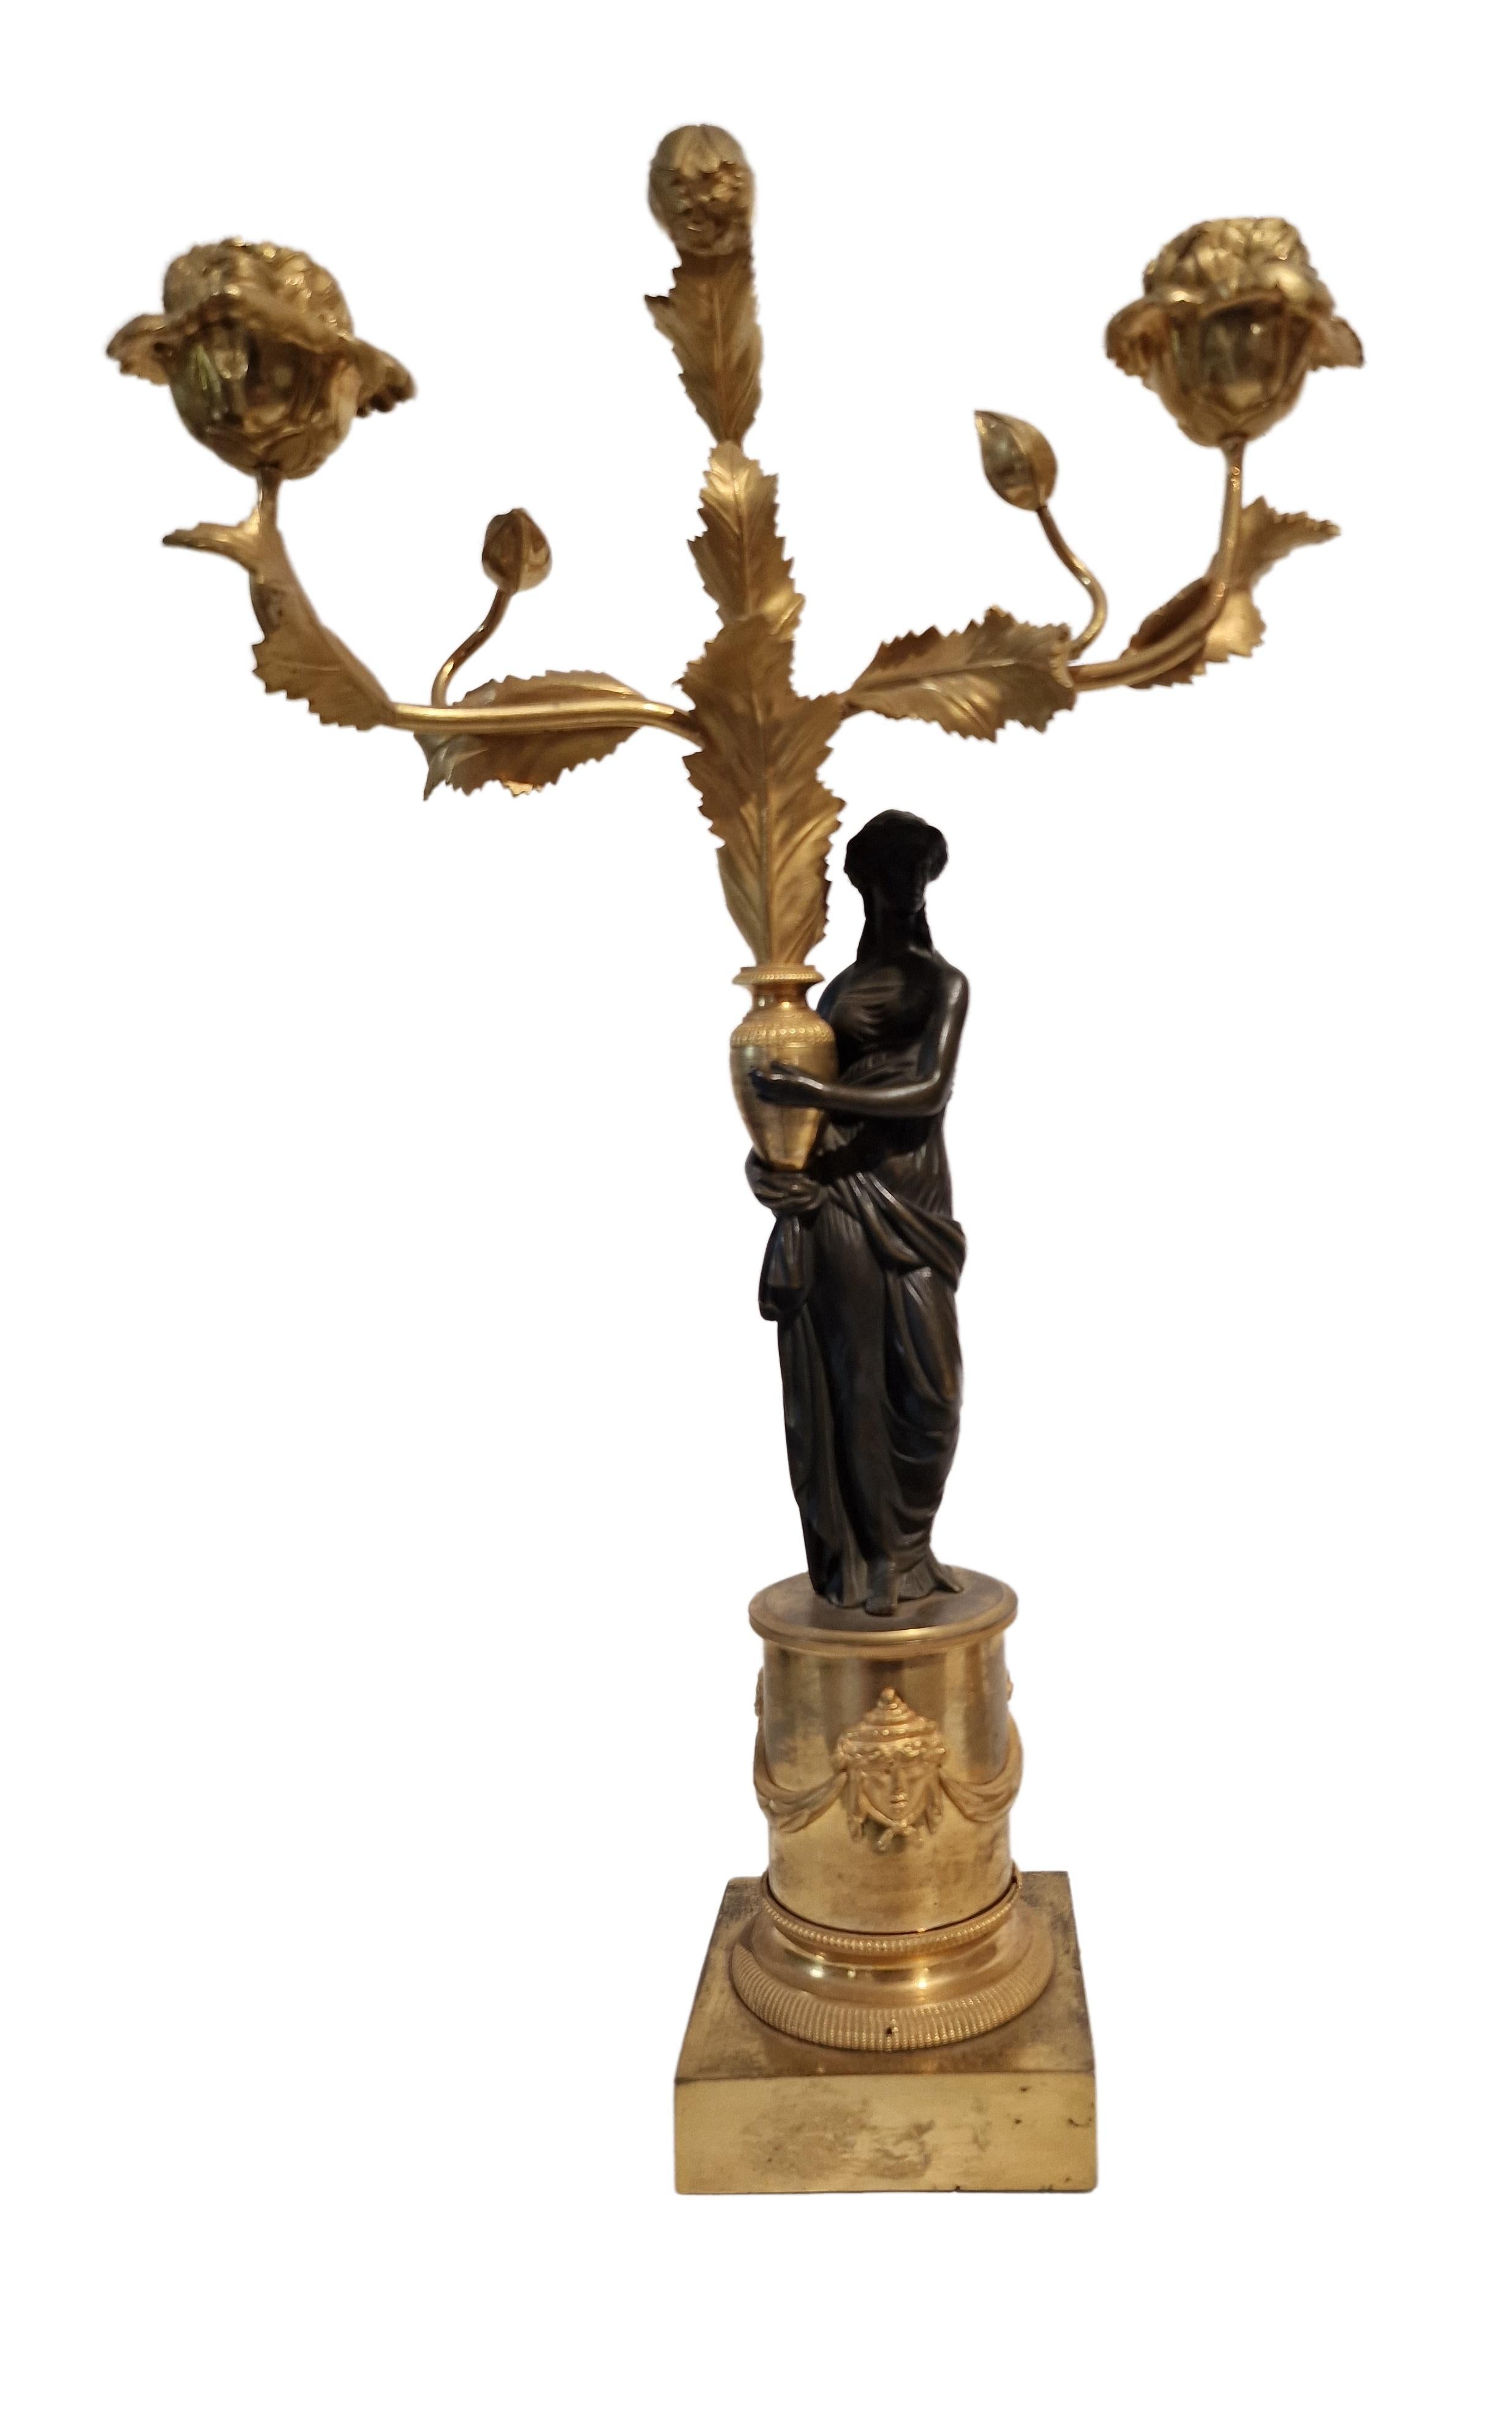 Stunning pair of so called Girandoles, made in France around 1810, in the famous Empire period. 

The stepped pedestals are beautifully designed with masks and garland décor. On each of them are an antique-style female figure made in bronze (typical